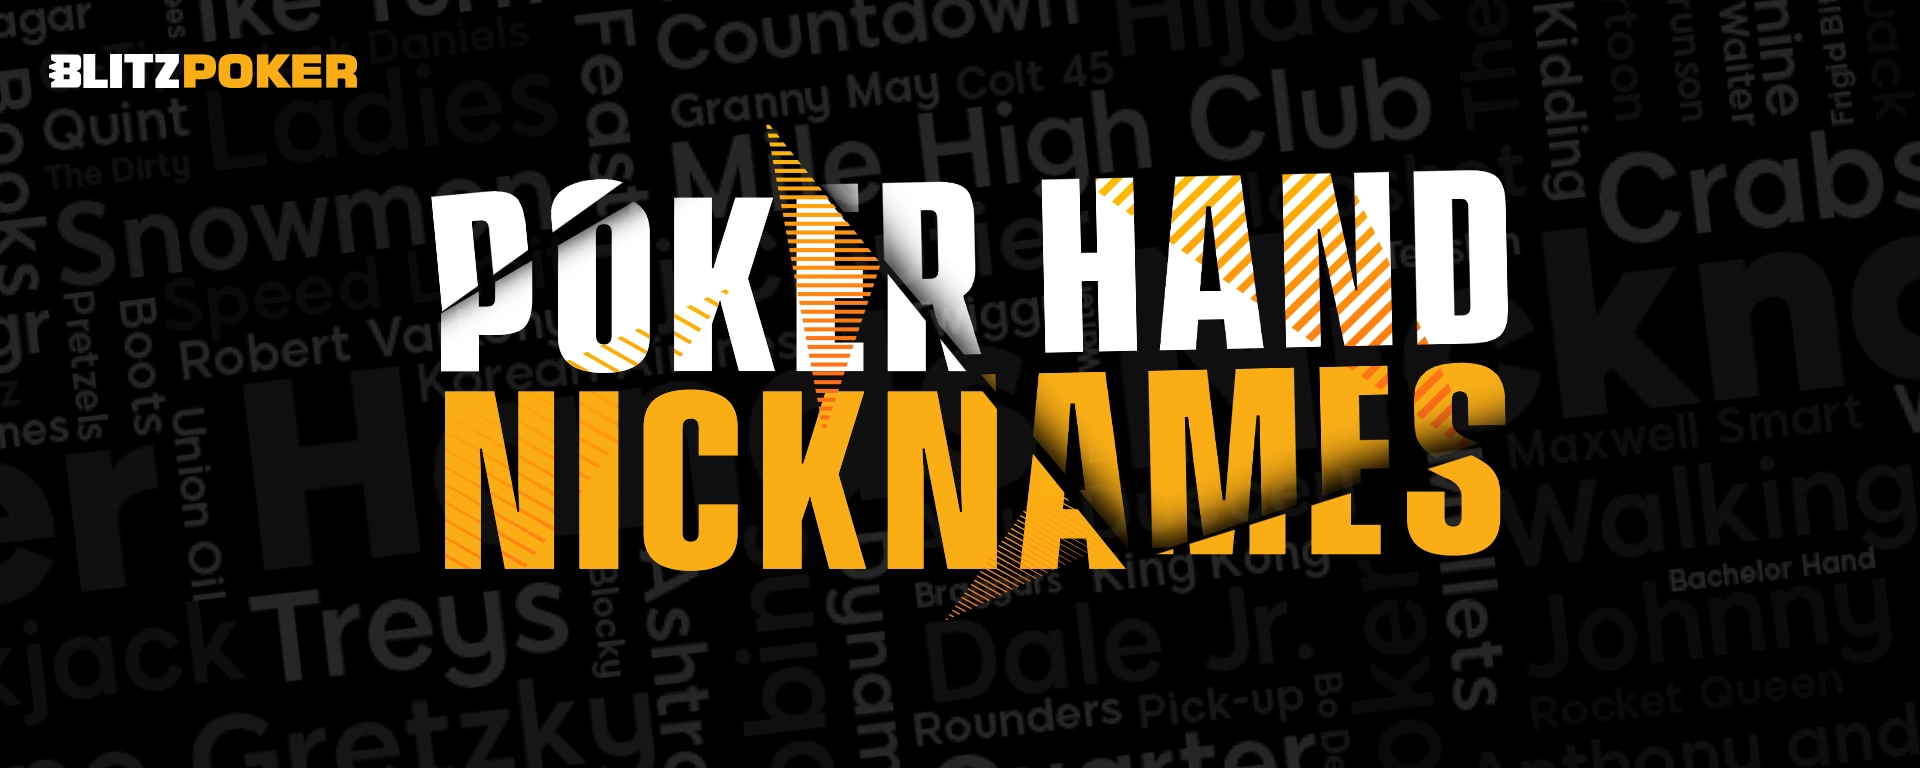 Poker Hand Nicknames: Behind the Cards Story Revealed